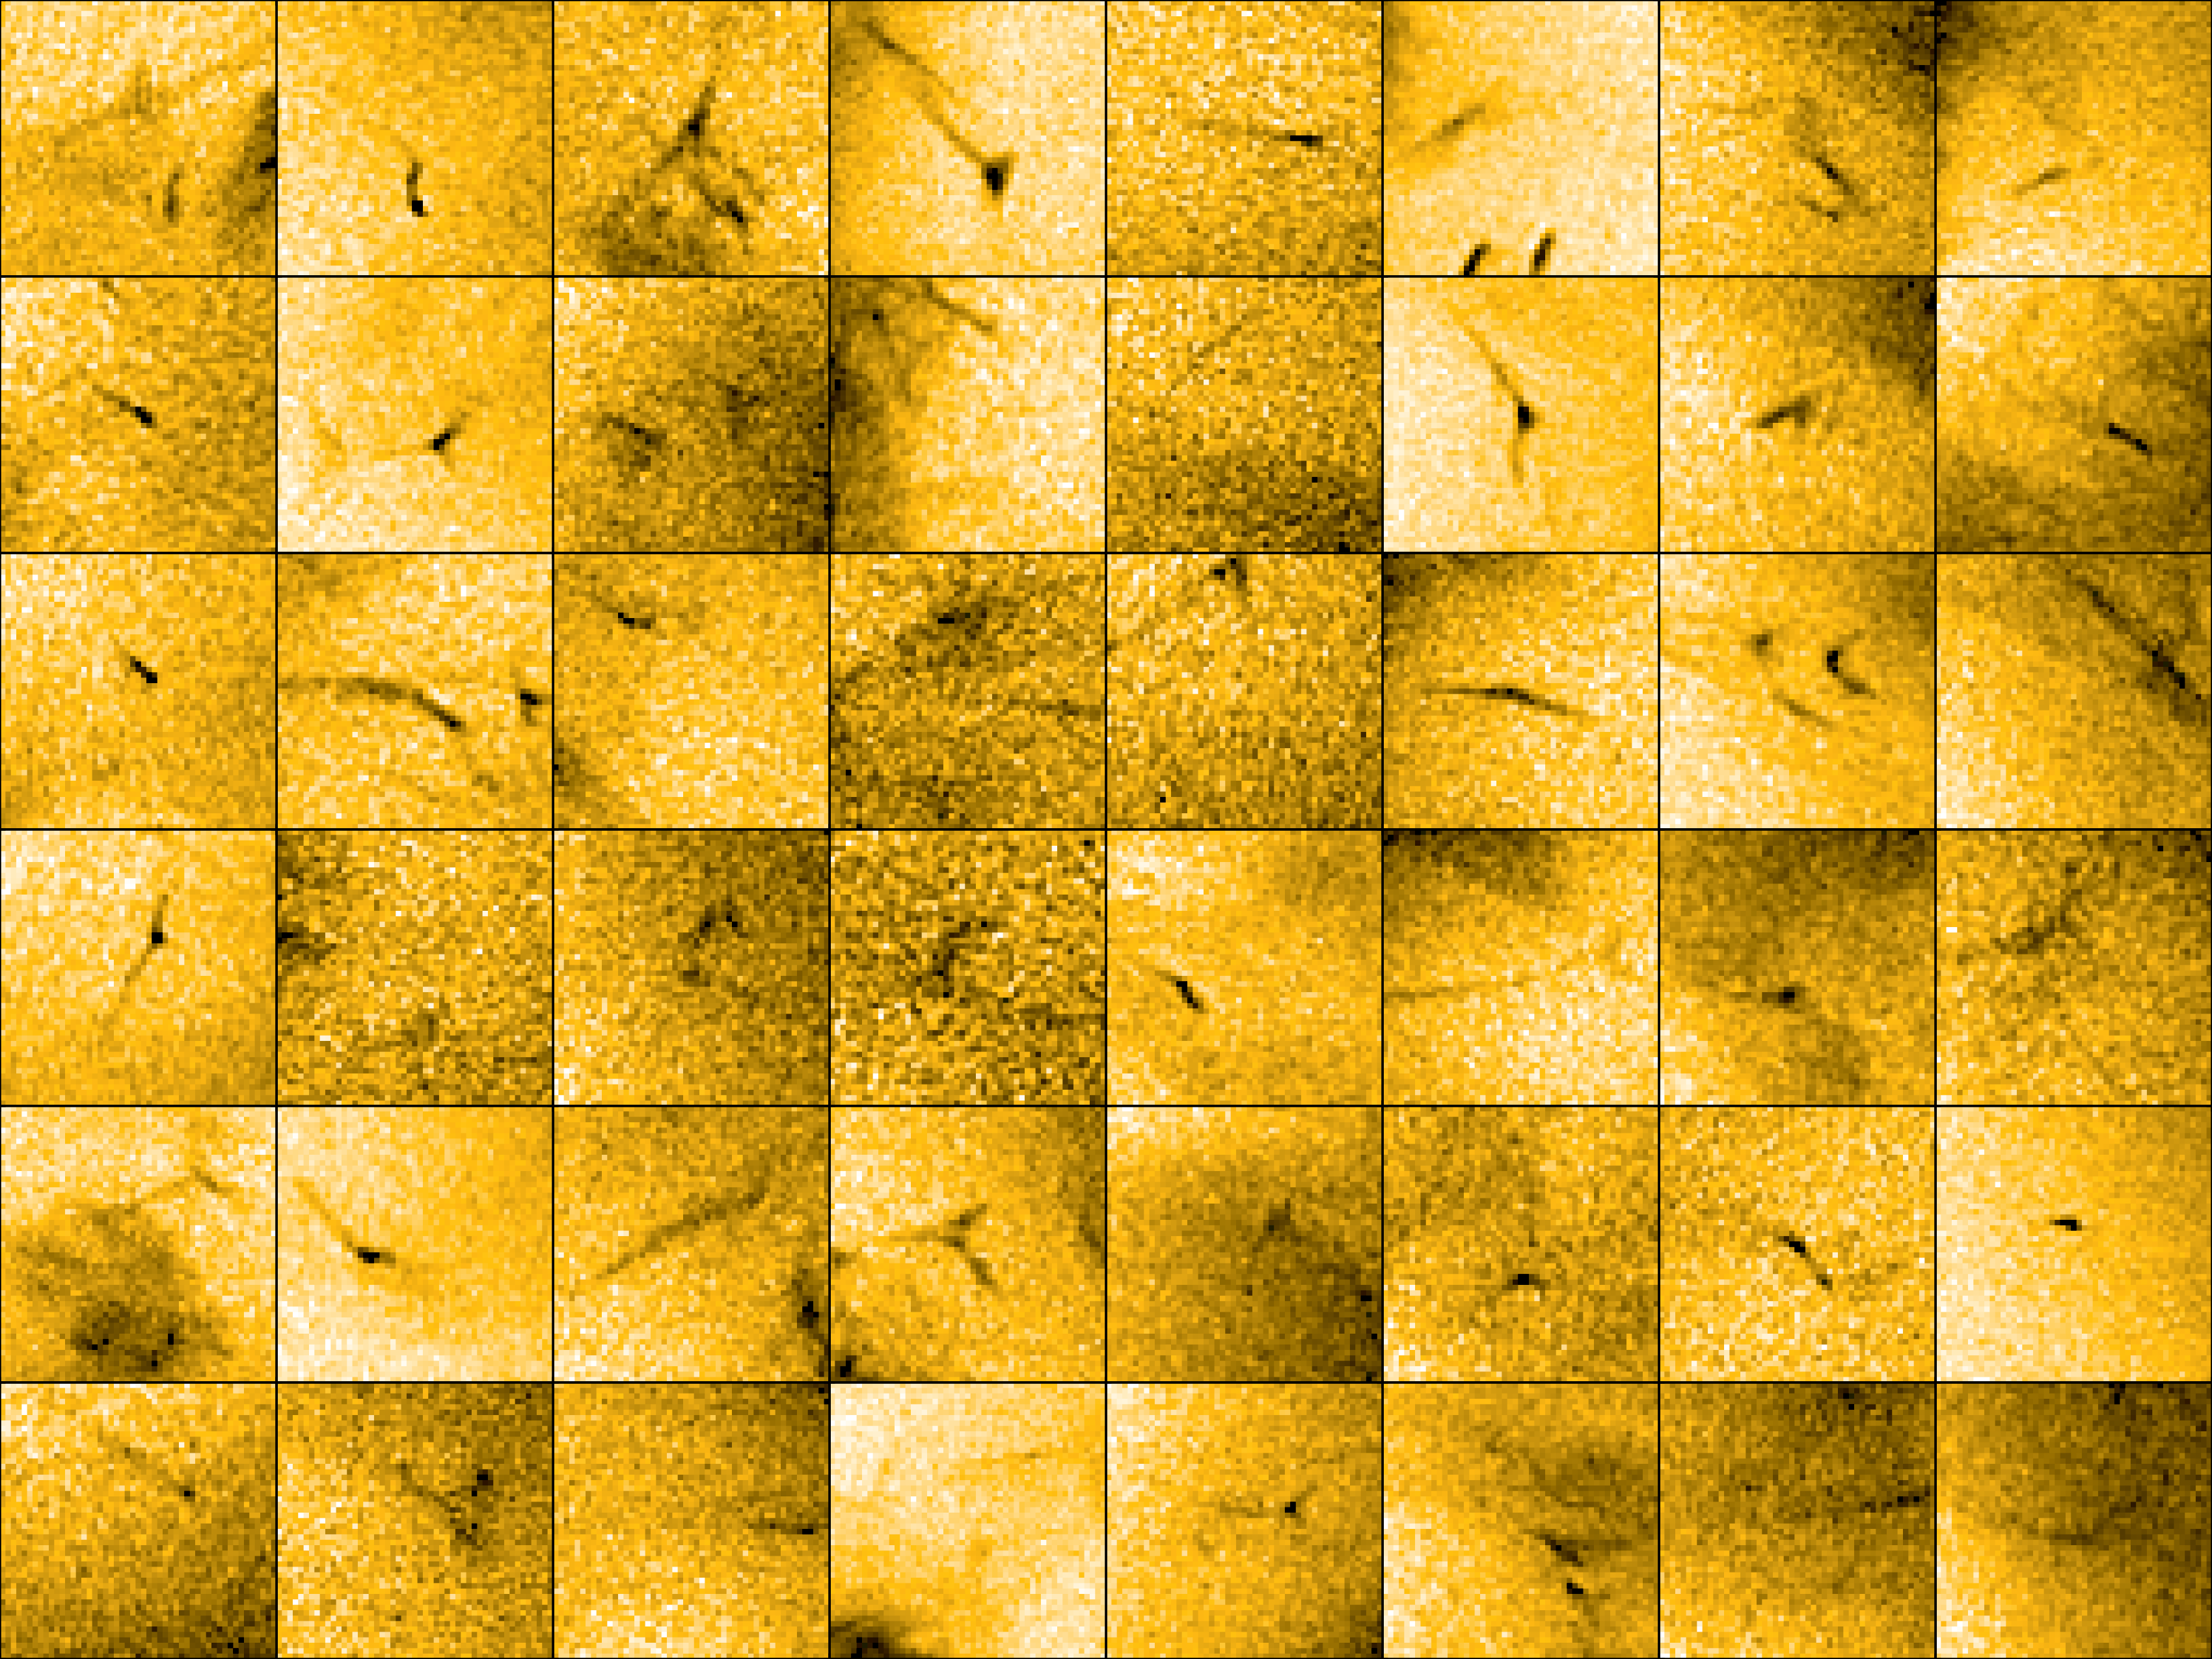 This mosaic of images shows a multitude of tiny jets of material escaping from the Sun’s outer atmosphere.